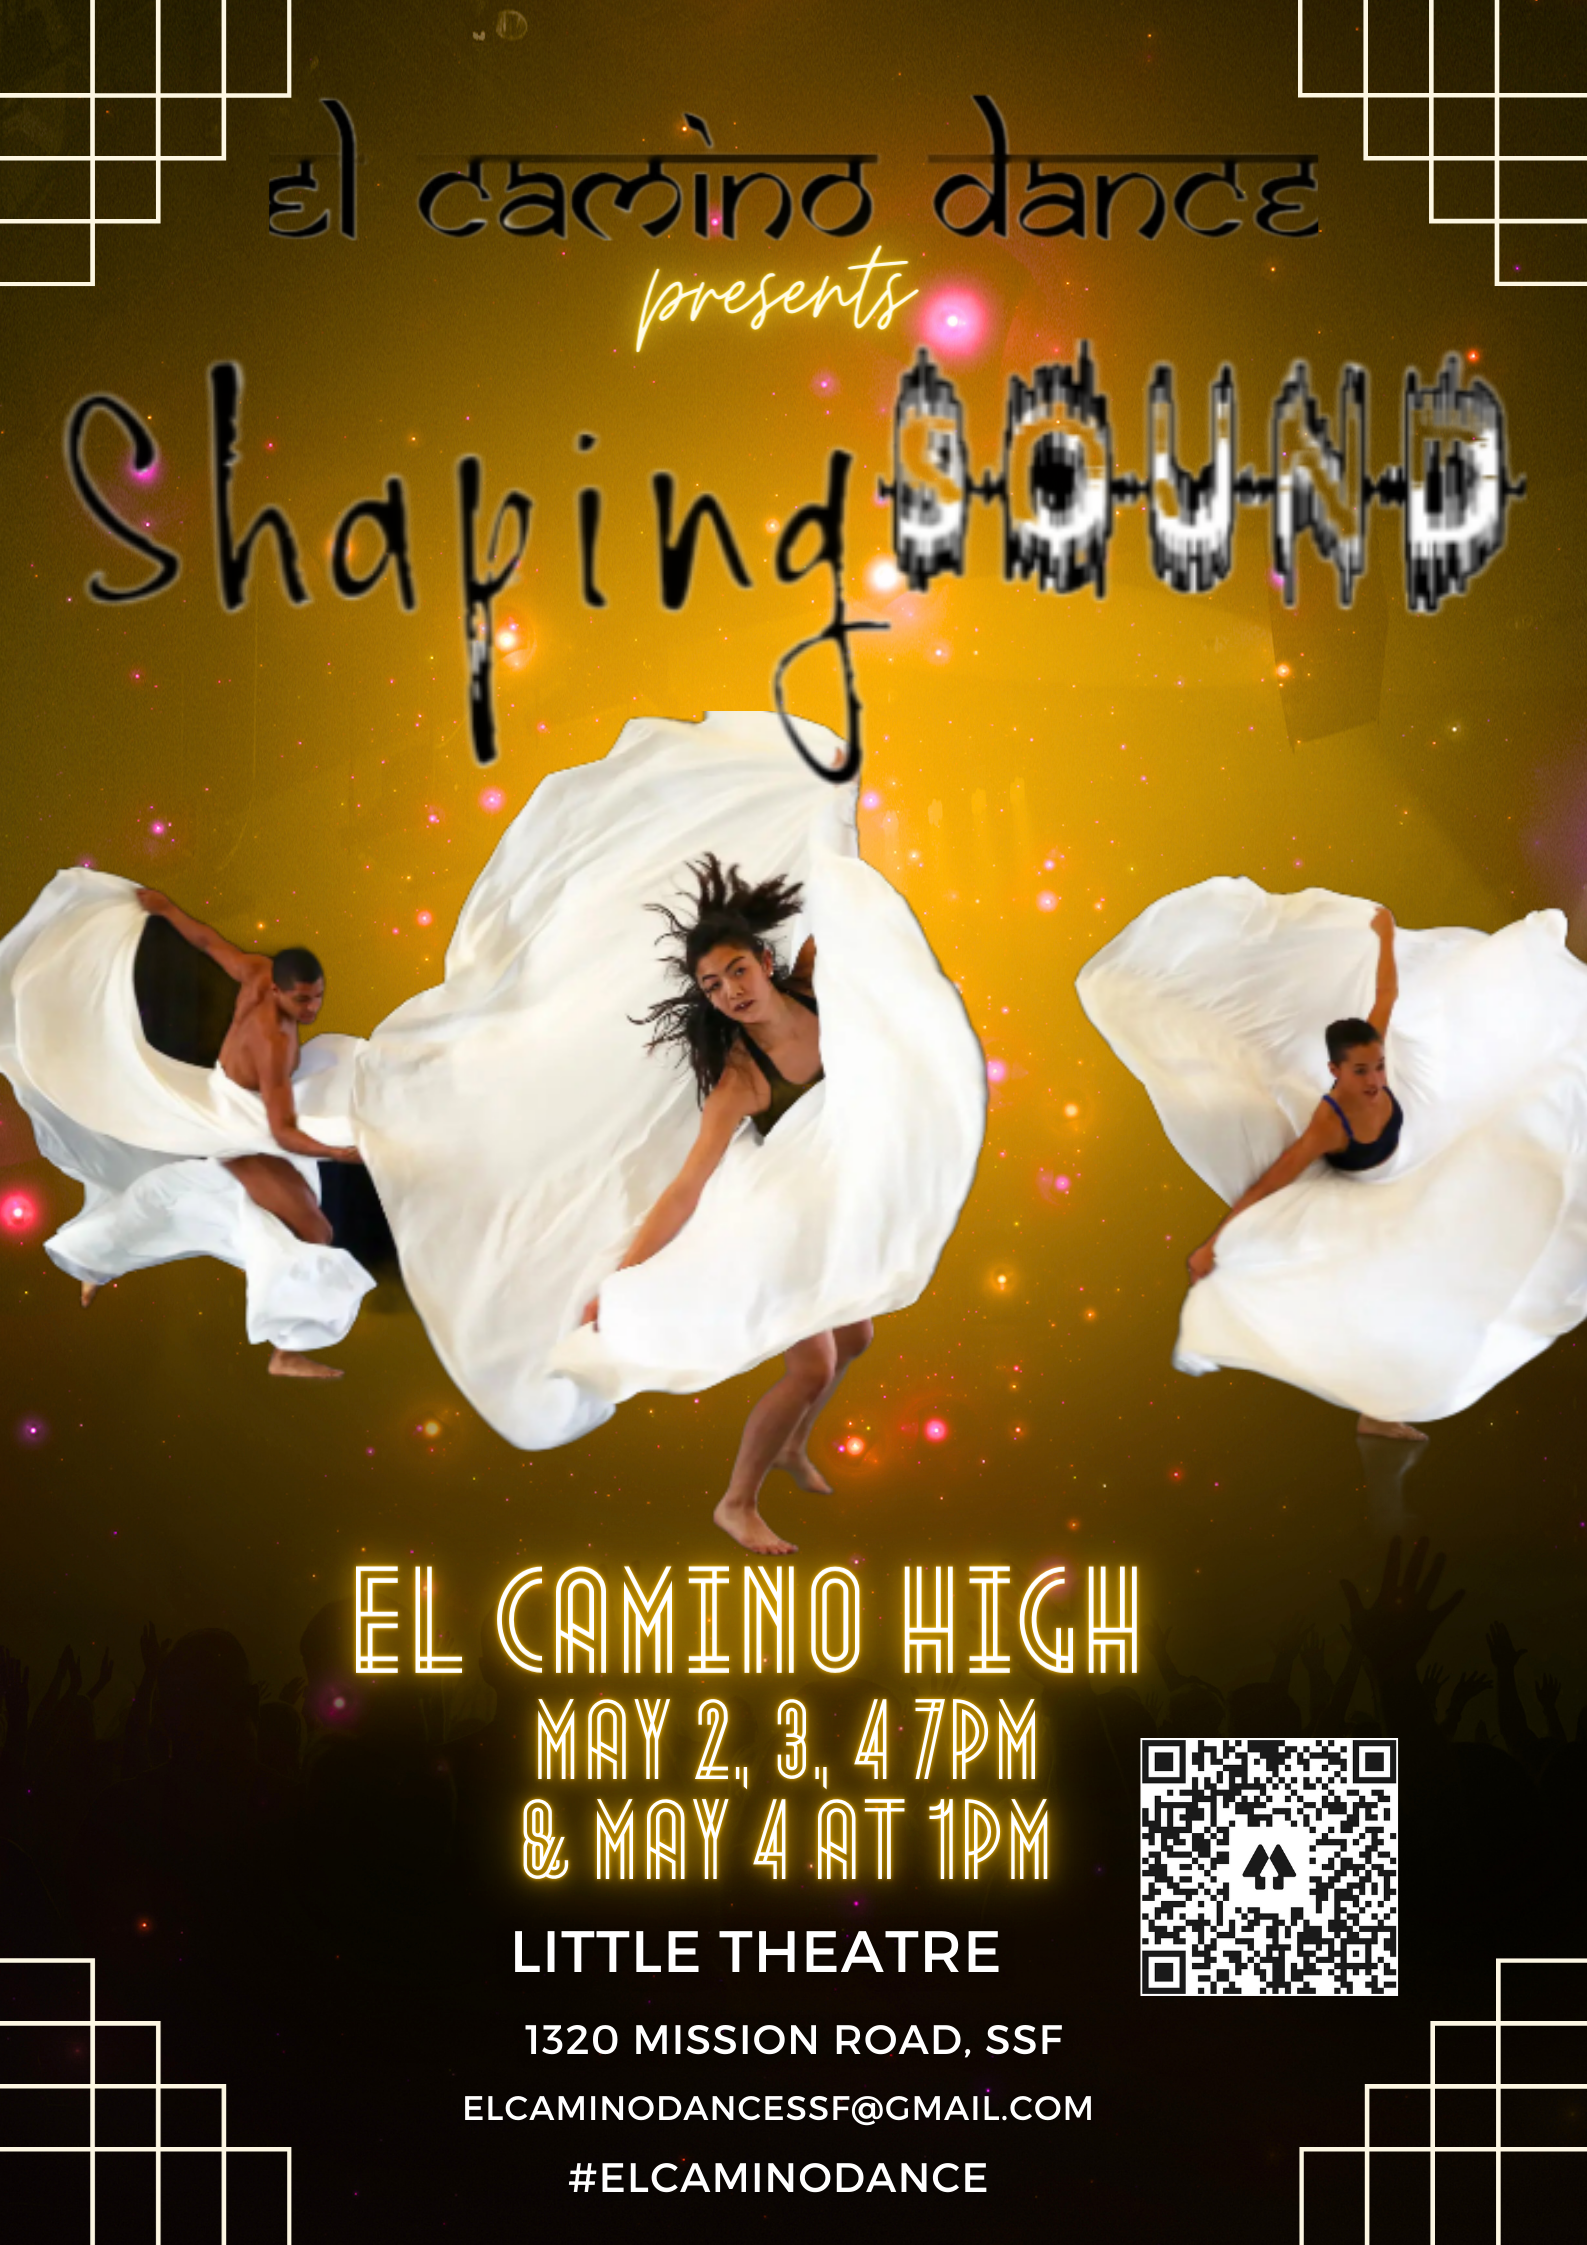 El Camino High dance program's spring recital Shaping Sound runs from May 2-4 at the school's Little Theater